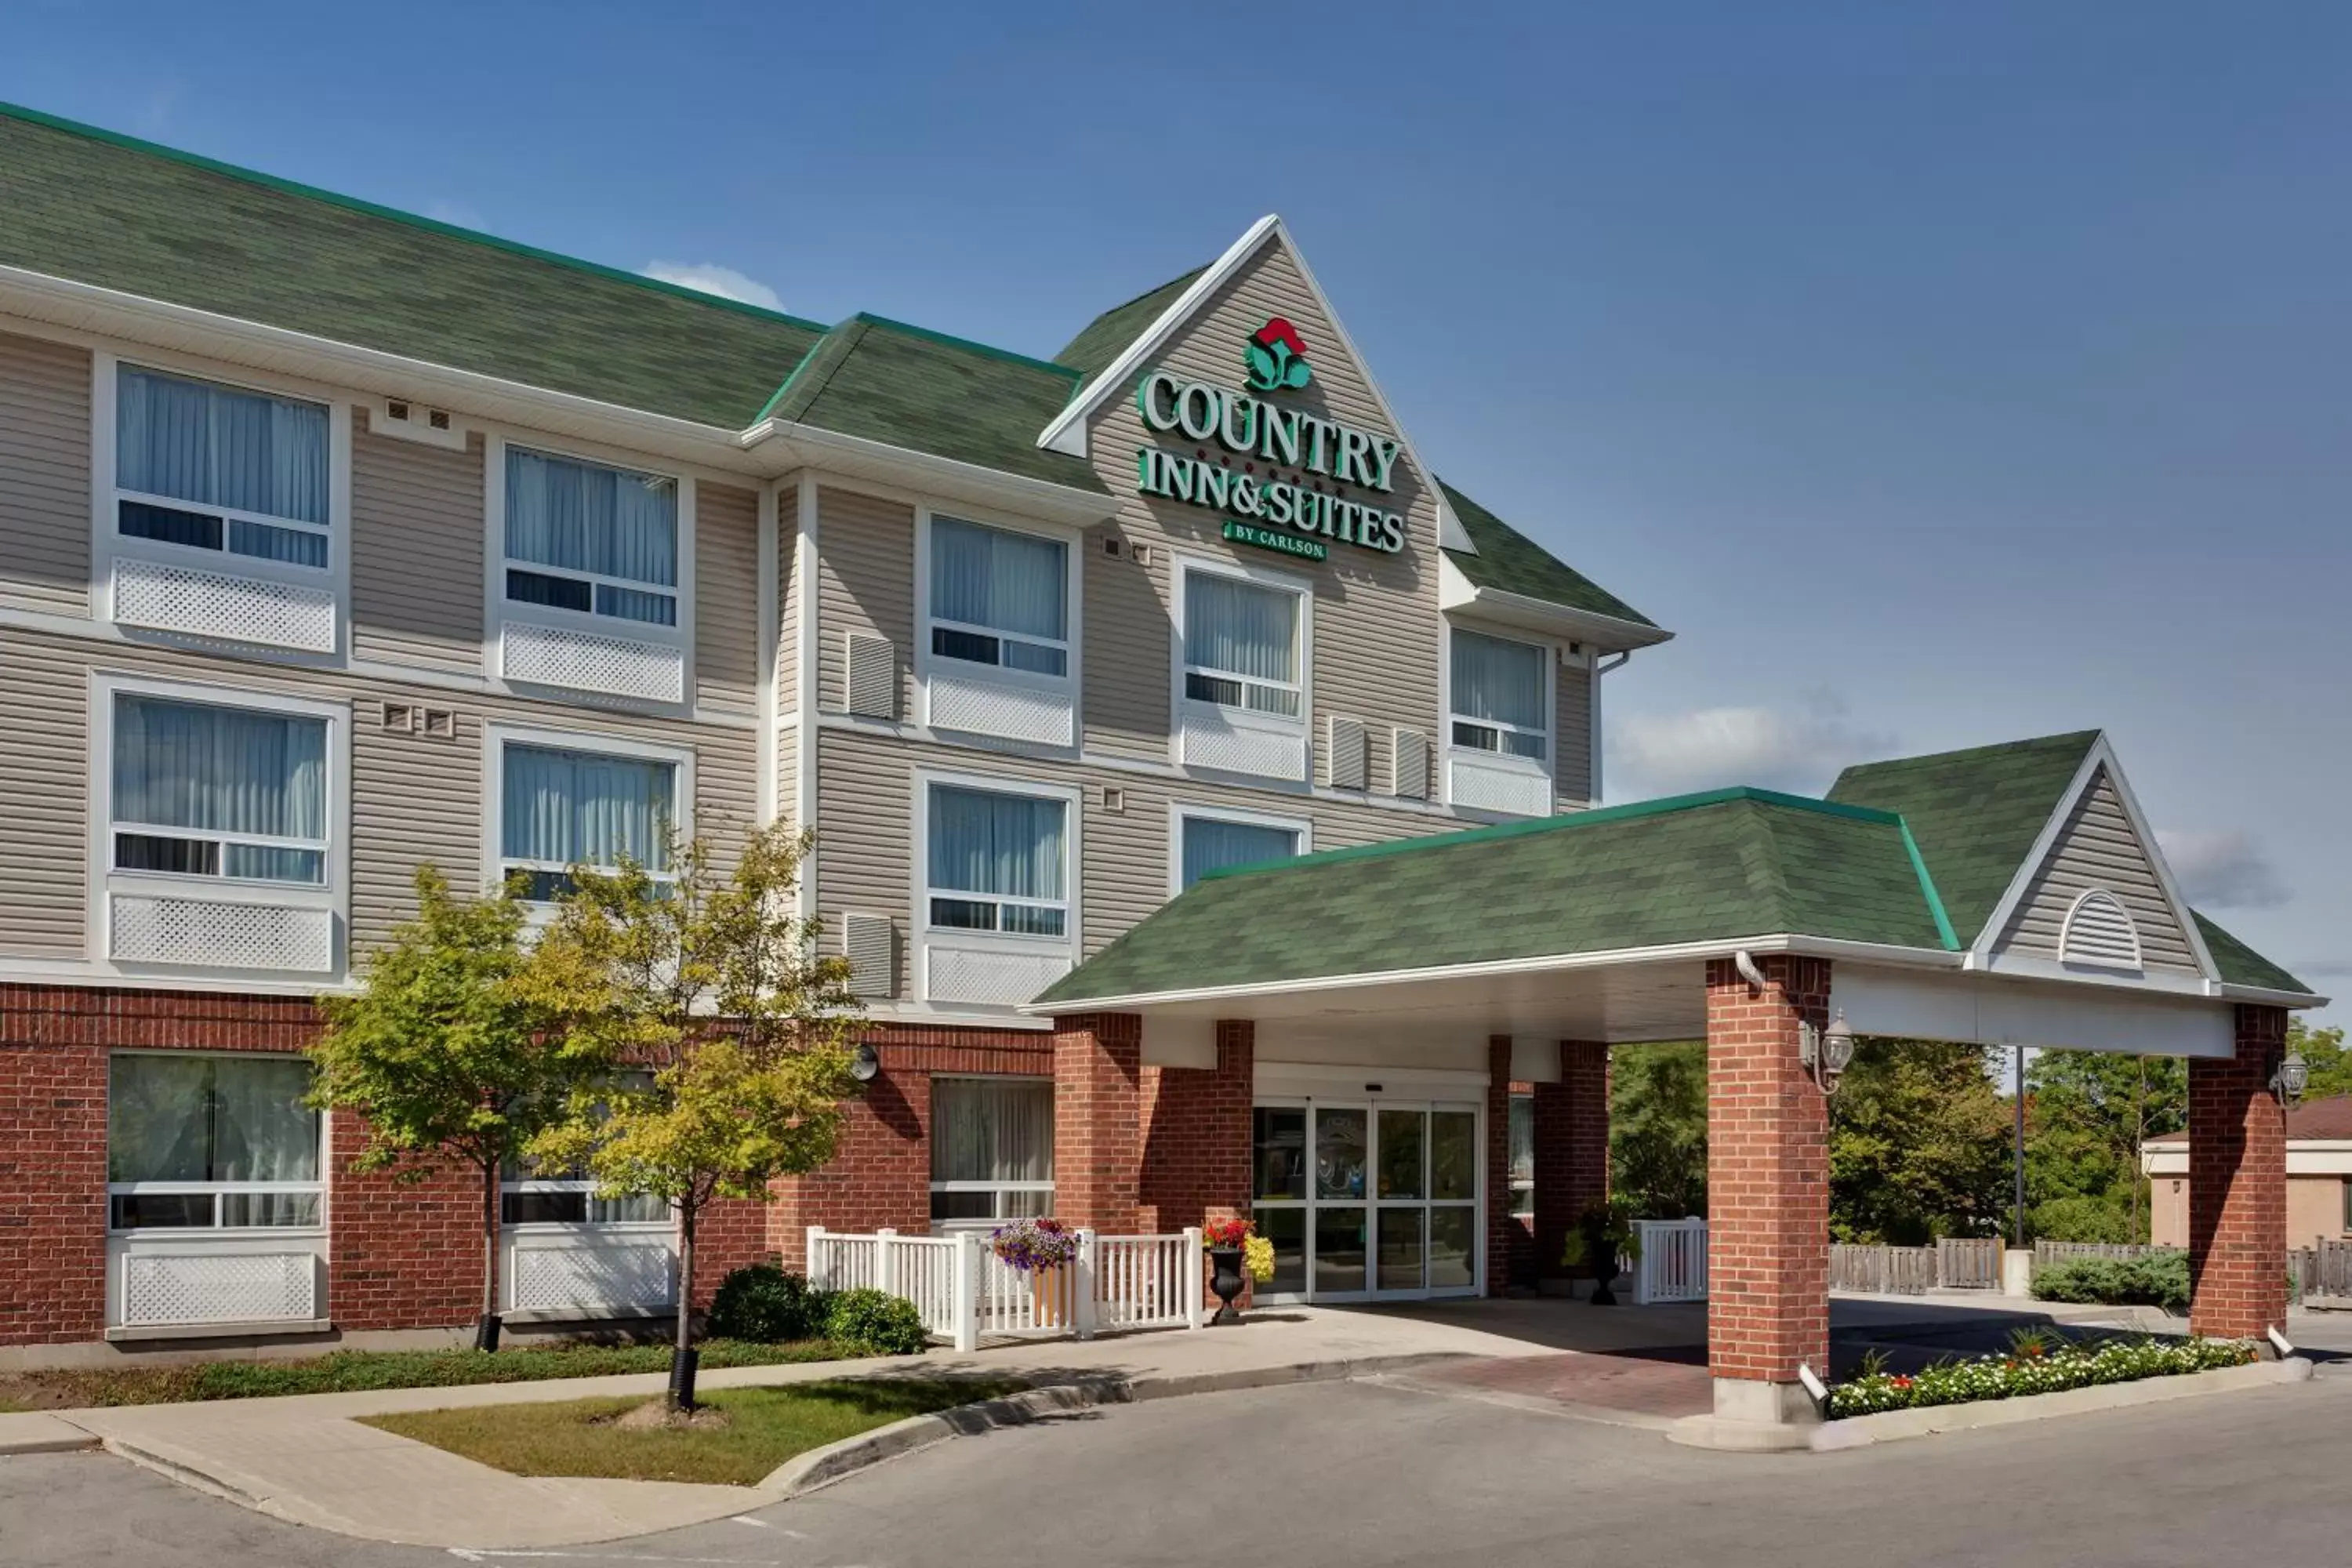 Property Building in Country Inn & Suites by Radisson, London South, ON